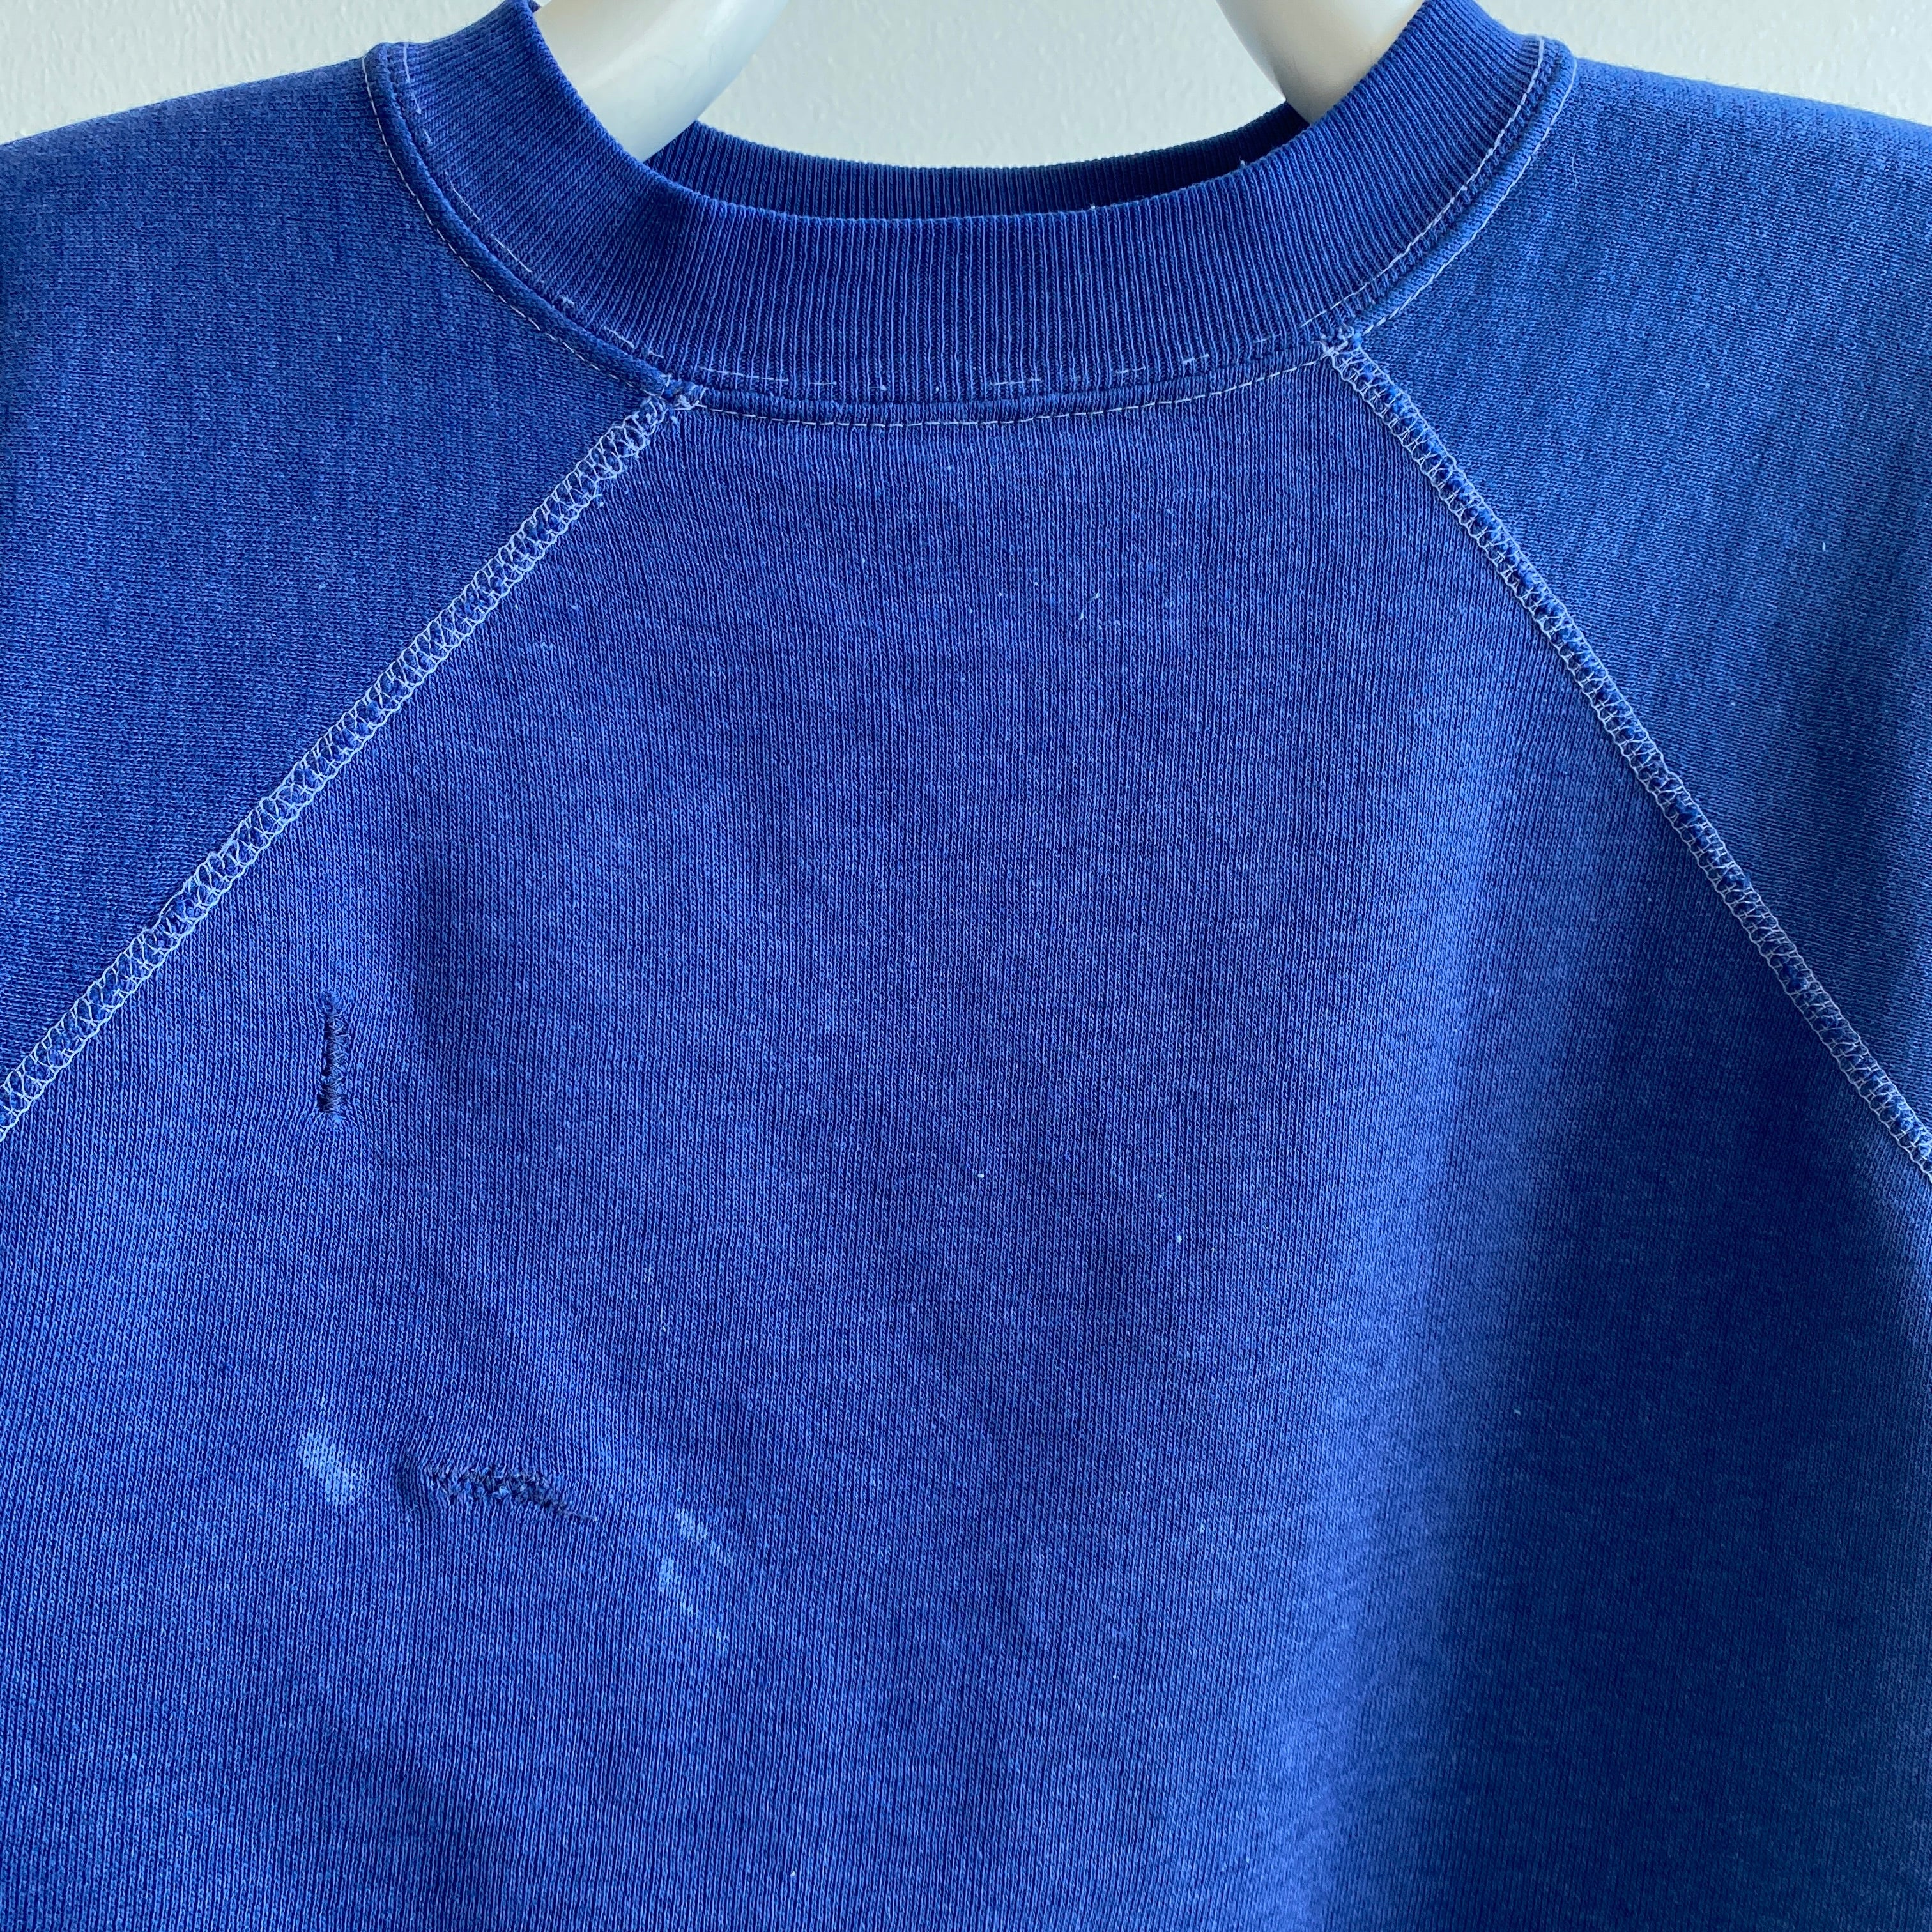 1970s Mended and Worn In The Best Way Blank Navy Warm Up with Contrast Stitching